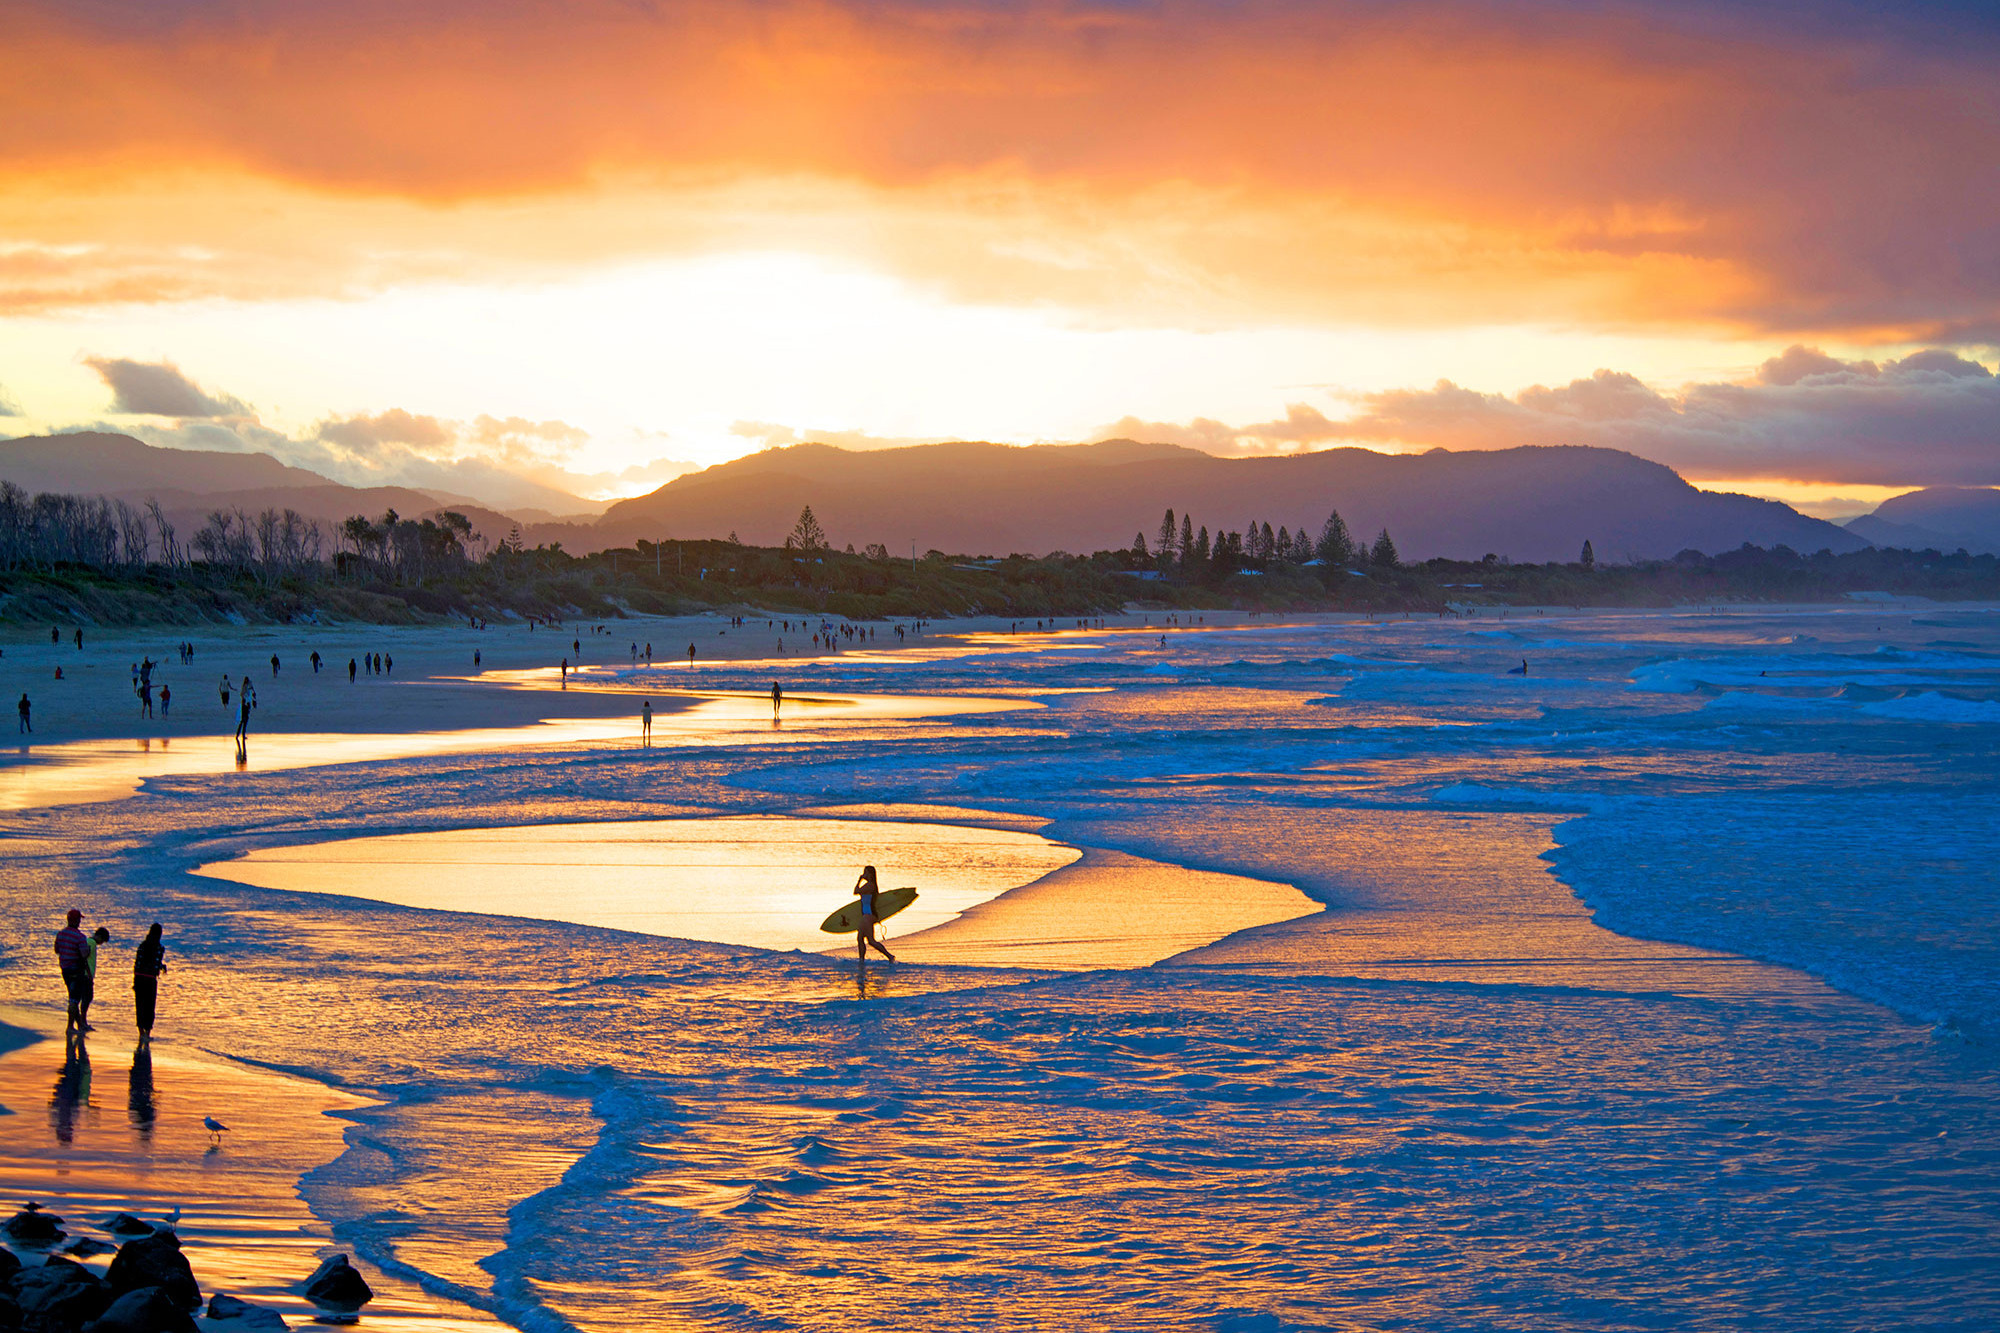 Find The Best Beaches On The East Coast: Noosa To Byron Bay